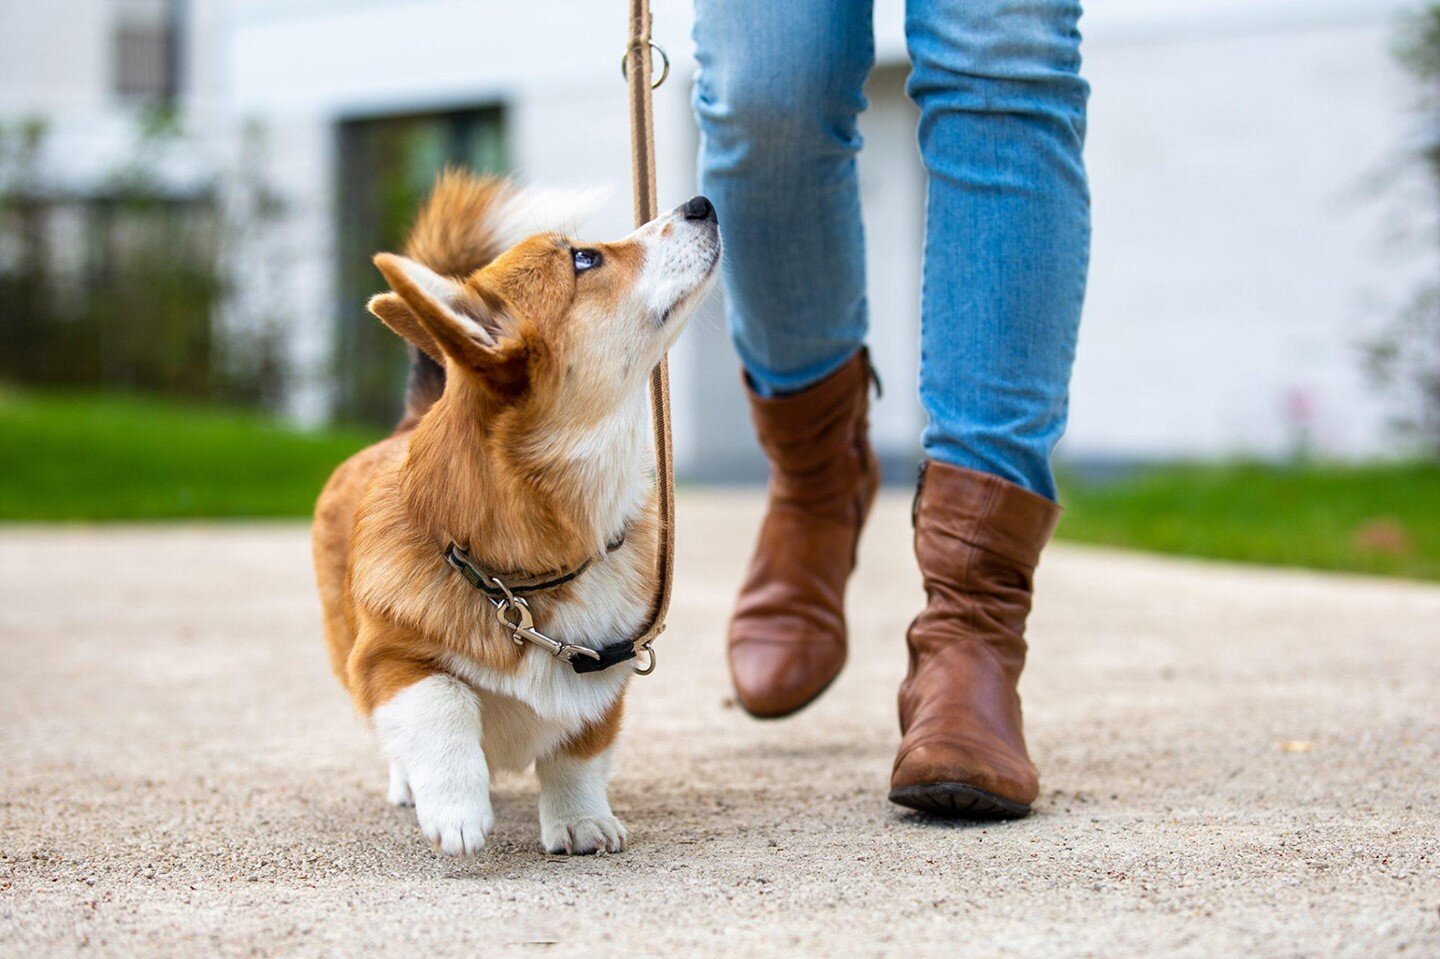 Walking with your pet

Read more about this here: https://1l.ink/QJB3QRQ 

#SonoraVeterinaryGroup #Sonora #Veterinarian #AnimalClinic AnimalHospital #PetWellness #PetDentistry #PetSurgery